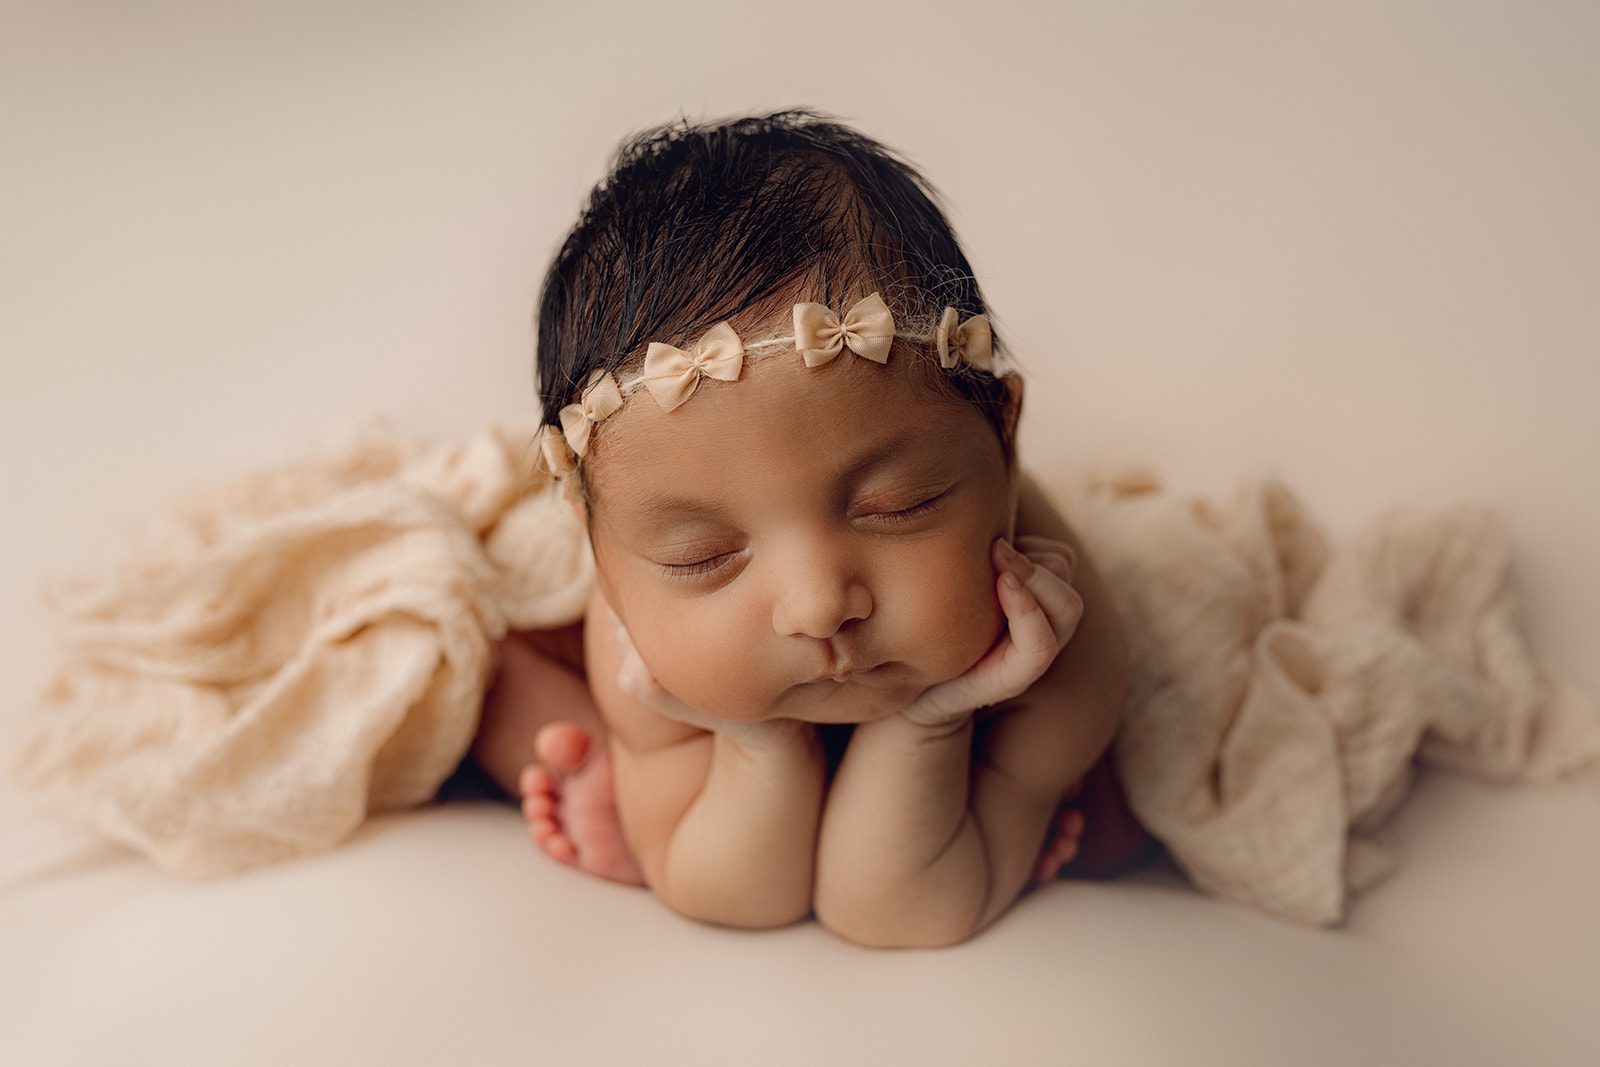 A newborn baby rests its head on its hands while wearing a beige bow headband